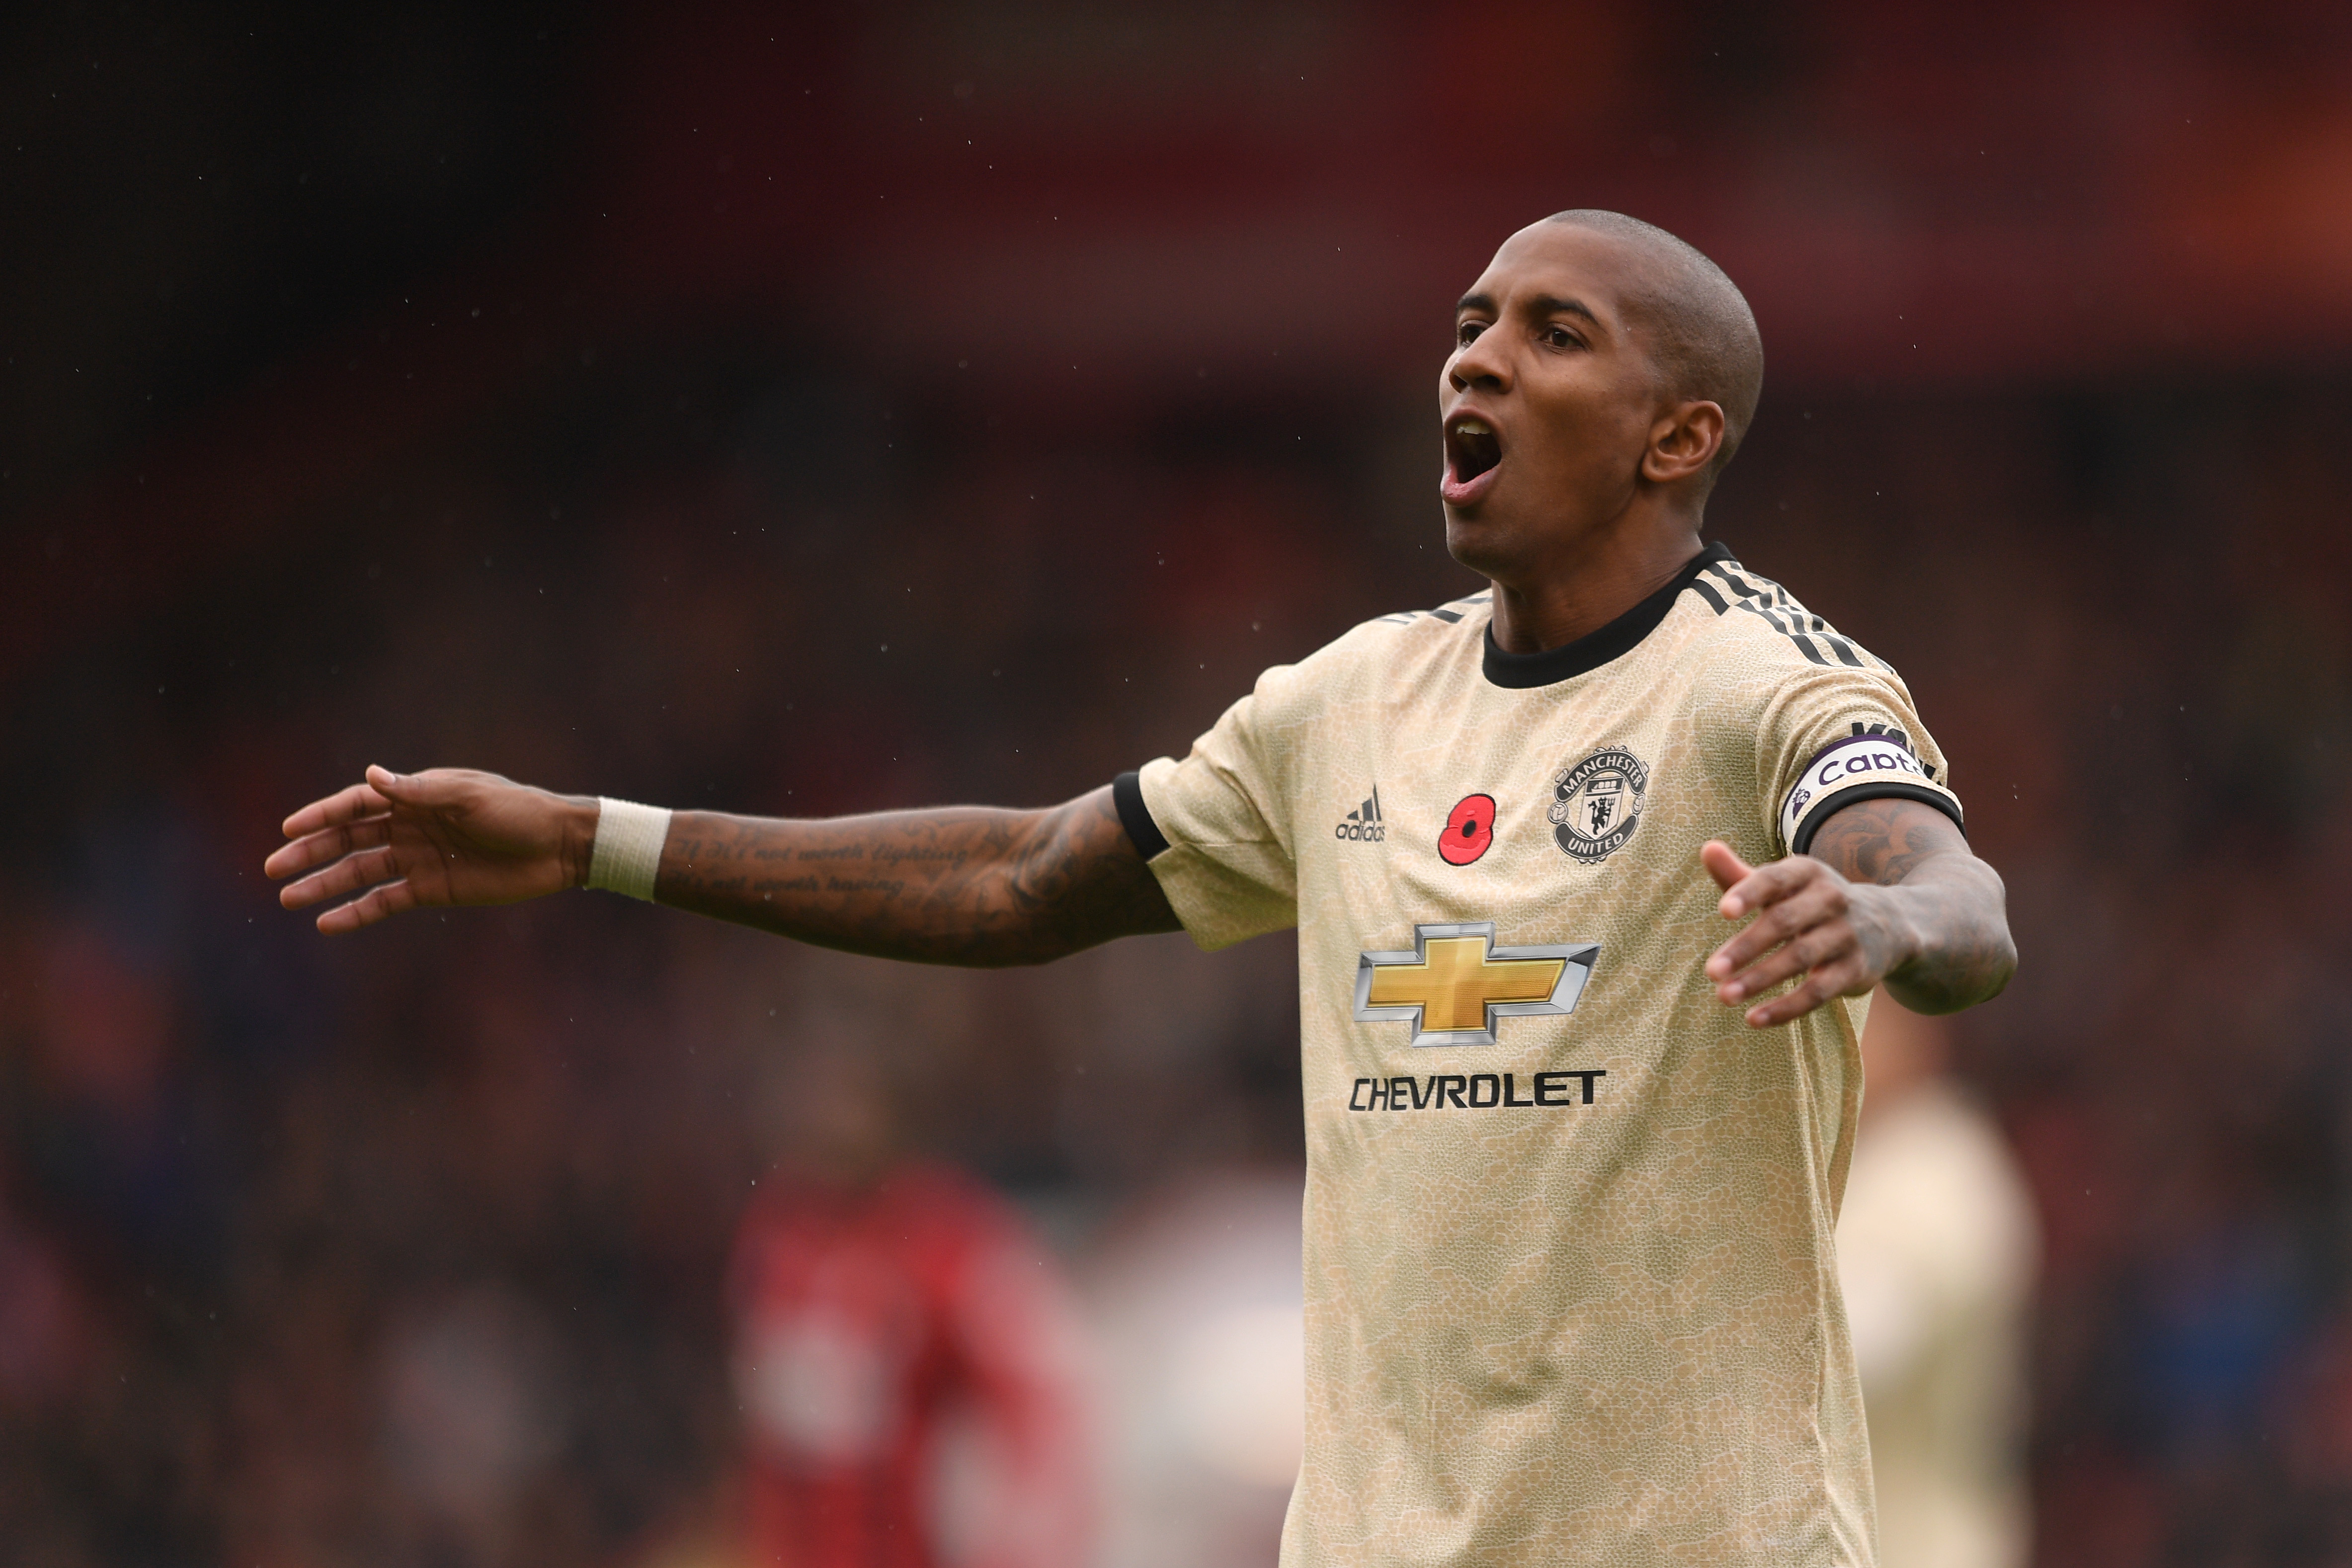 BOURNEMOUTH, ENGLAND - NOVEMBER 02: Ashley Young of Manchester United reacts during the Premier League match between AFC Bournemouth and Manchester United at Vitality Stadium on November 02, 2019 in Bournemouth, United Kingdom. (Photo by Harry Trump/Getty Images)